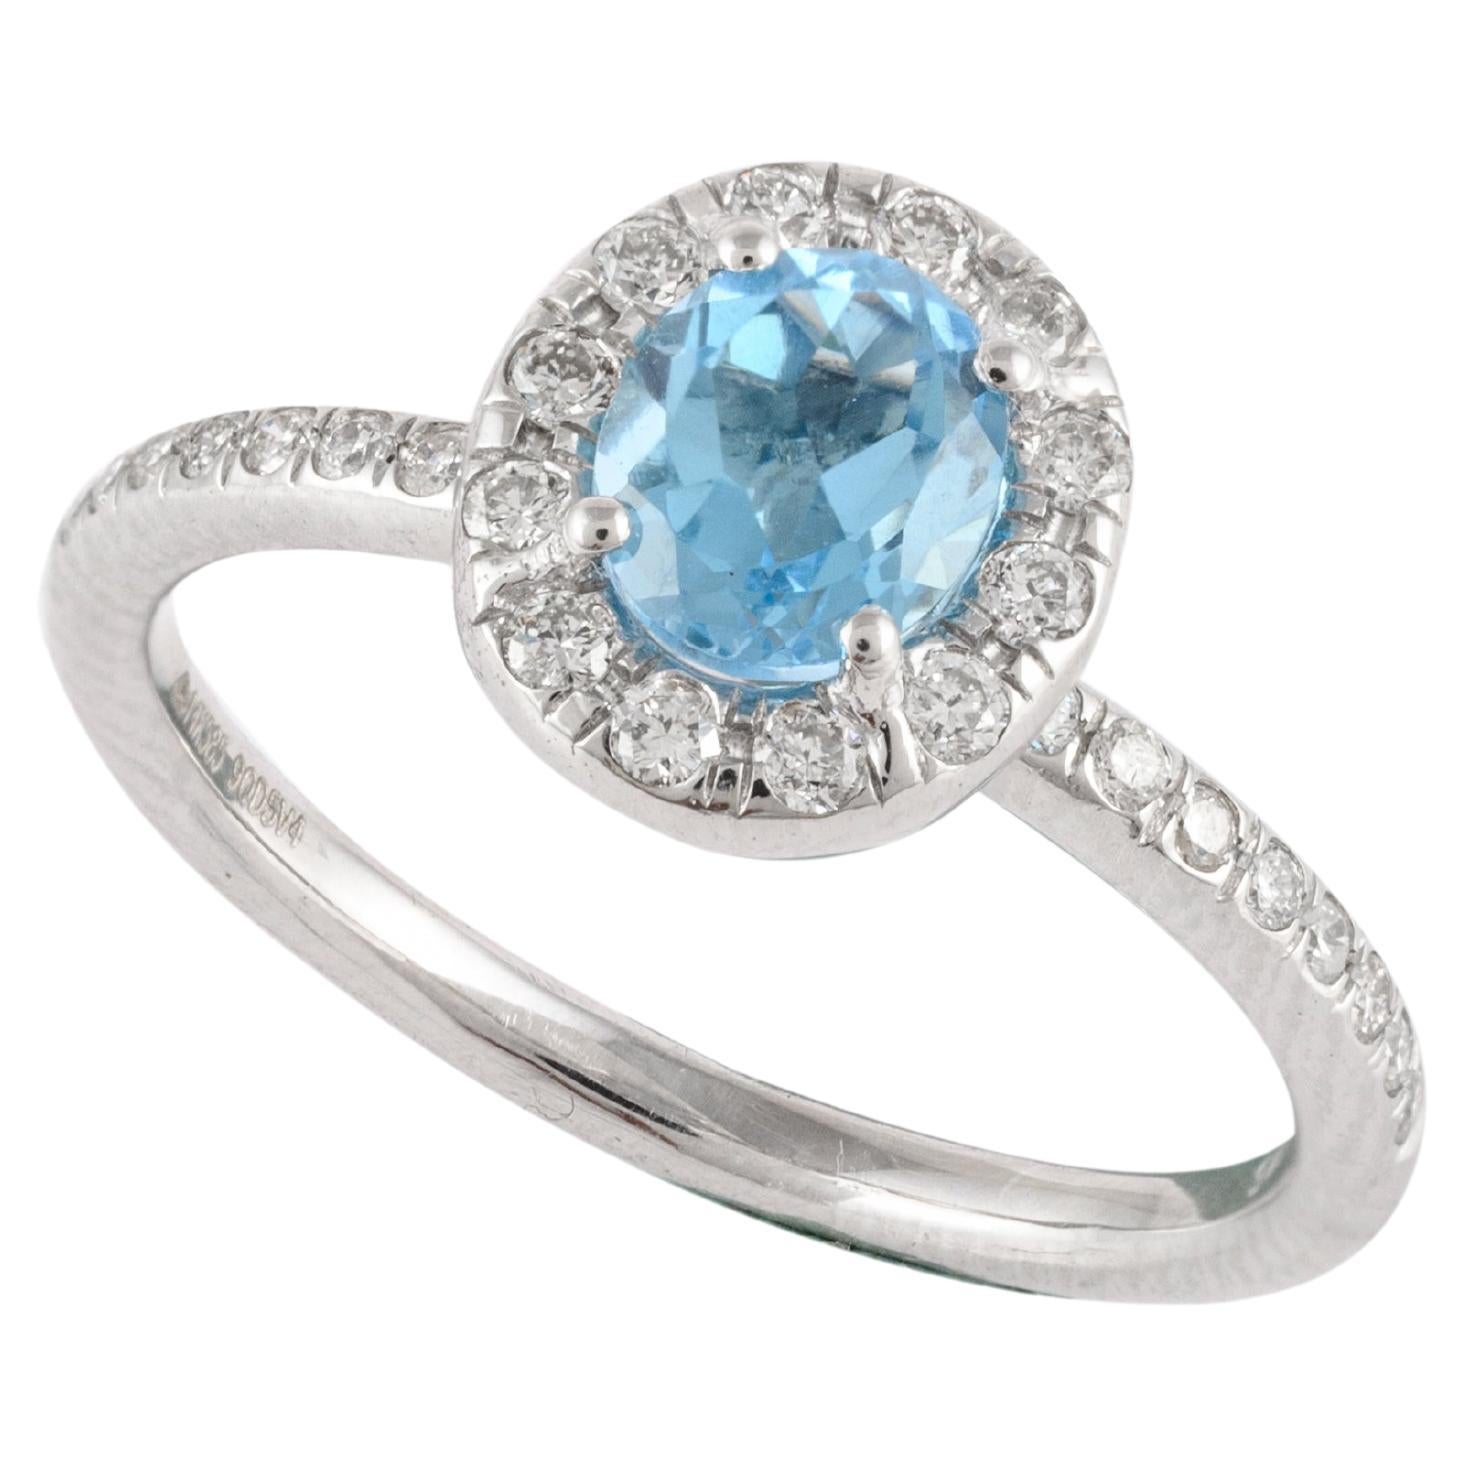 Real 14kt Solid White Gold Halo Diamond And Oval Cut Blue Topaz Ring For Her